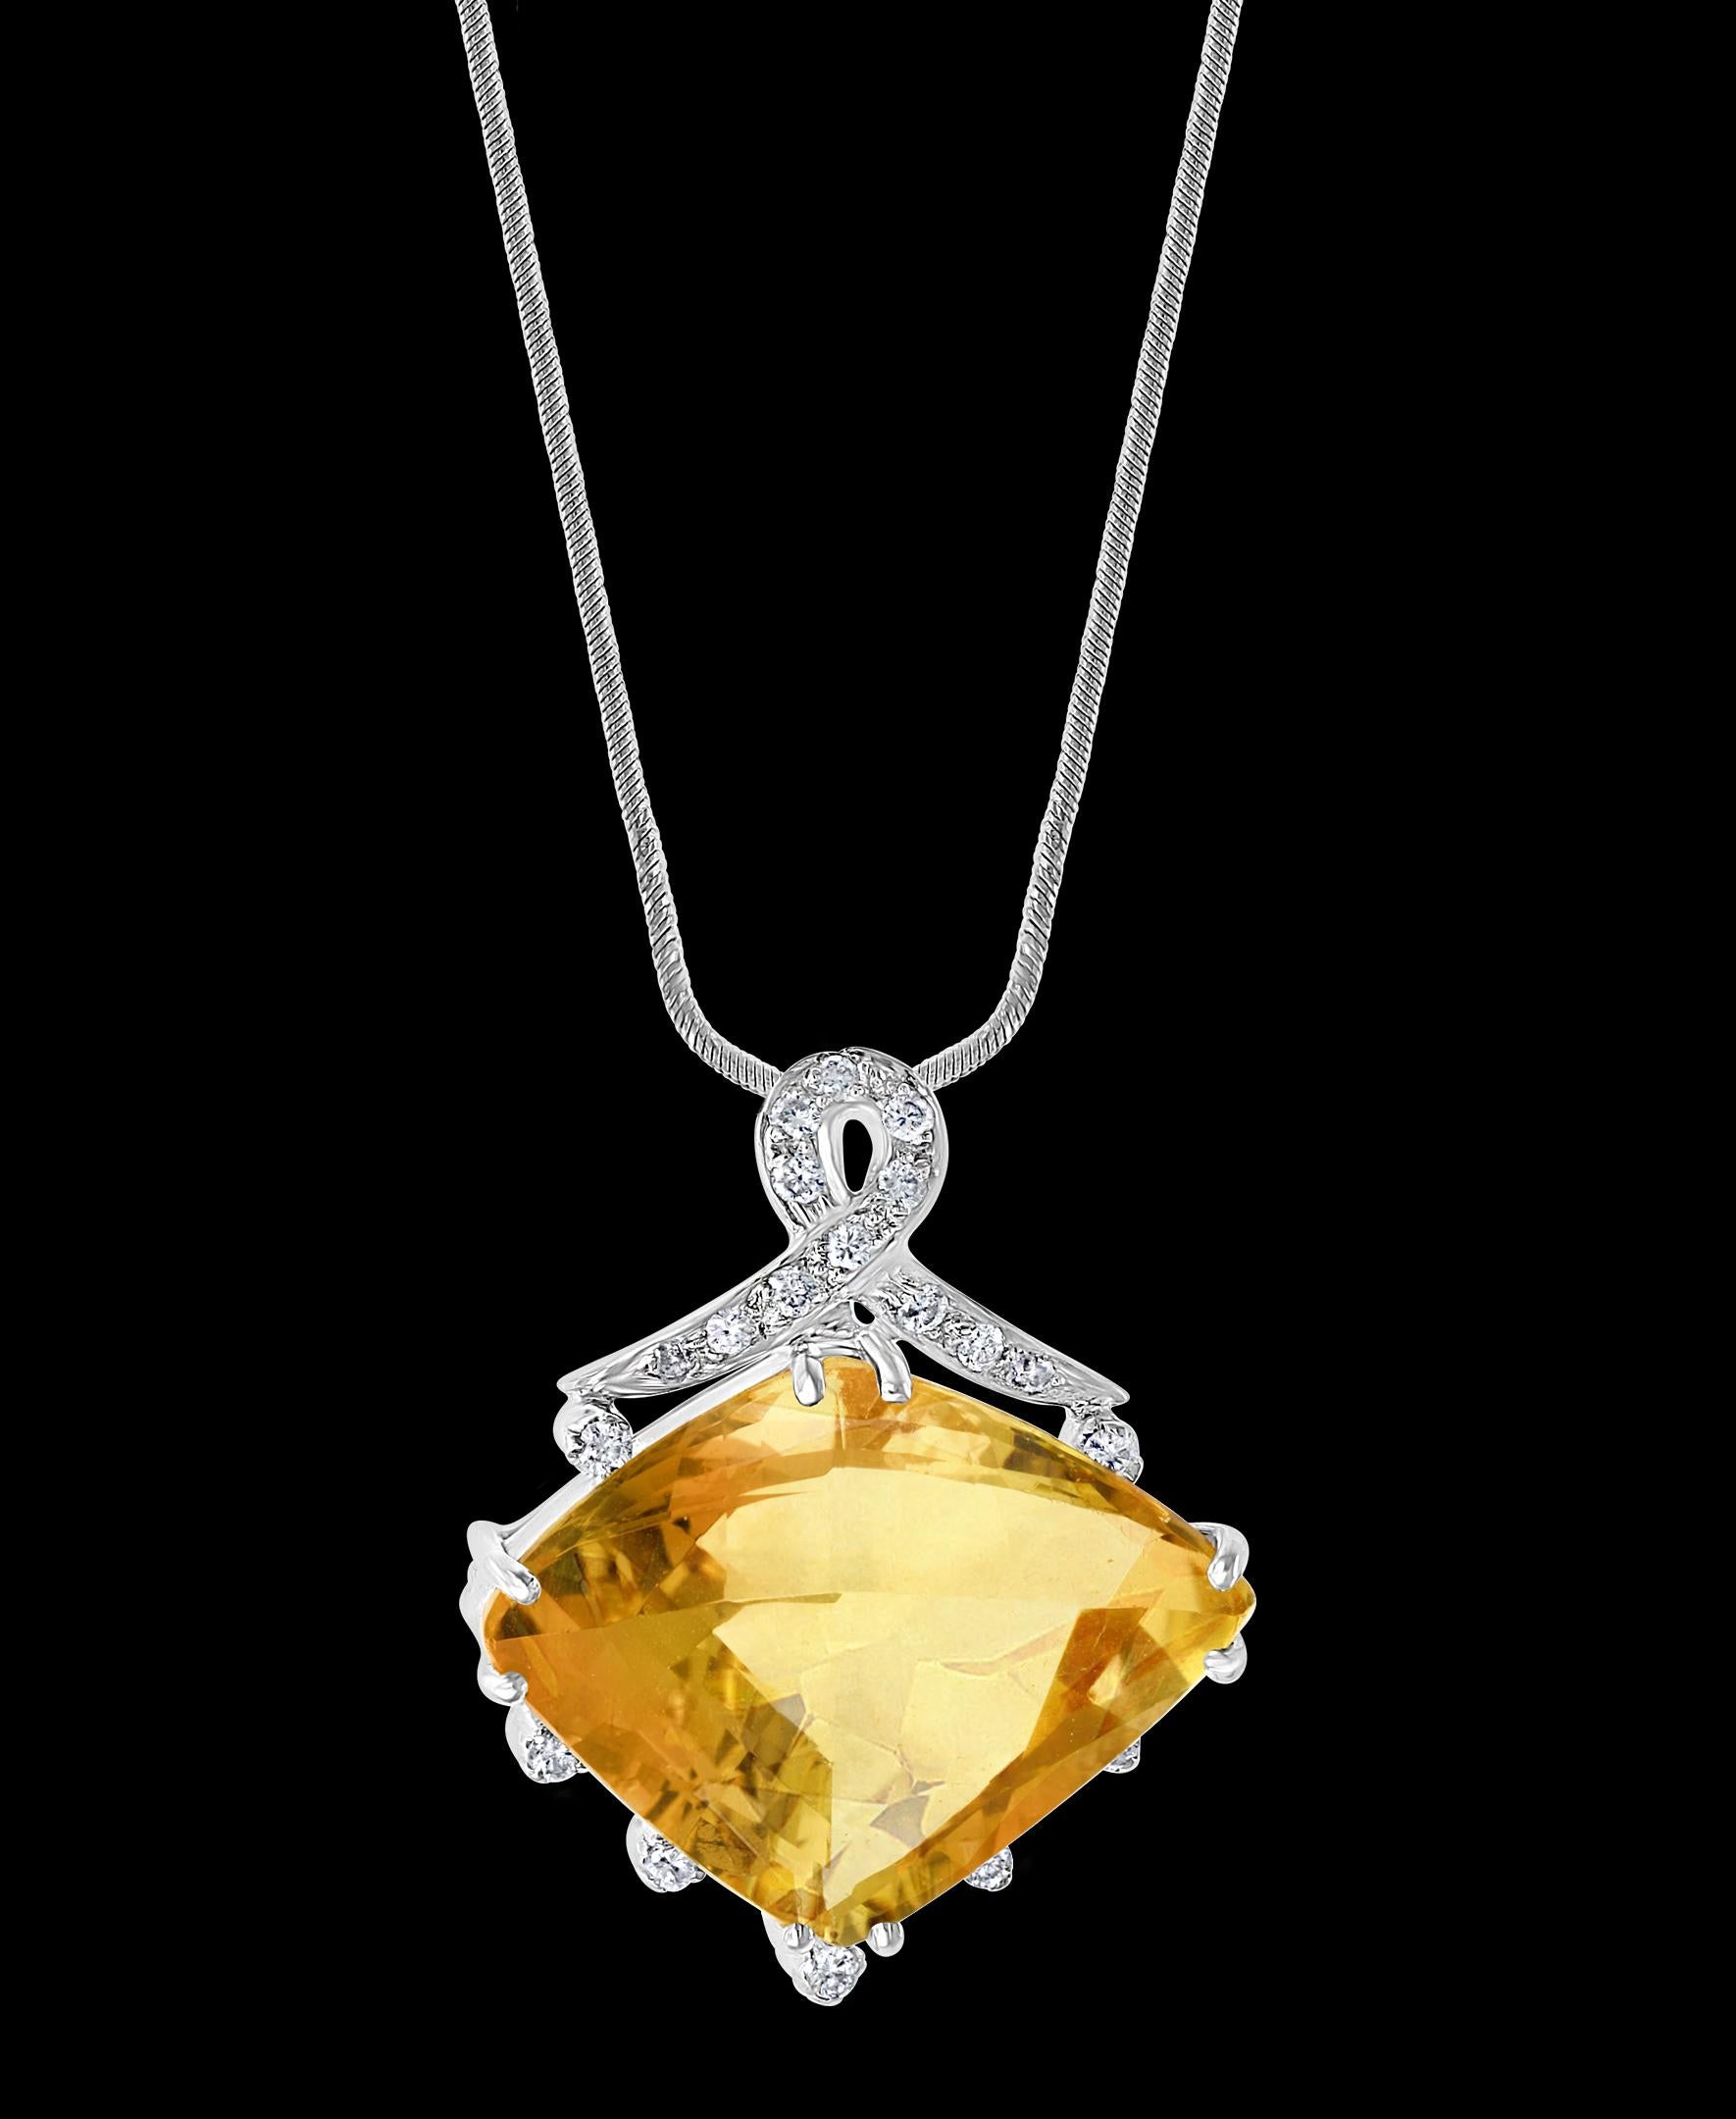   21 Carat Lemon Topaz and Diamond Pendant Necklace Enhancer, 18 Karat White Gold
This spectacular Pendant Necklace  consisting of a single Lemonn Topaz approximately 21 Carat.  The Stone   is surrounded by approximately 0.30 Carats of  brilliant